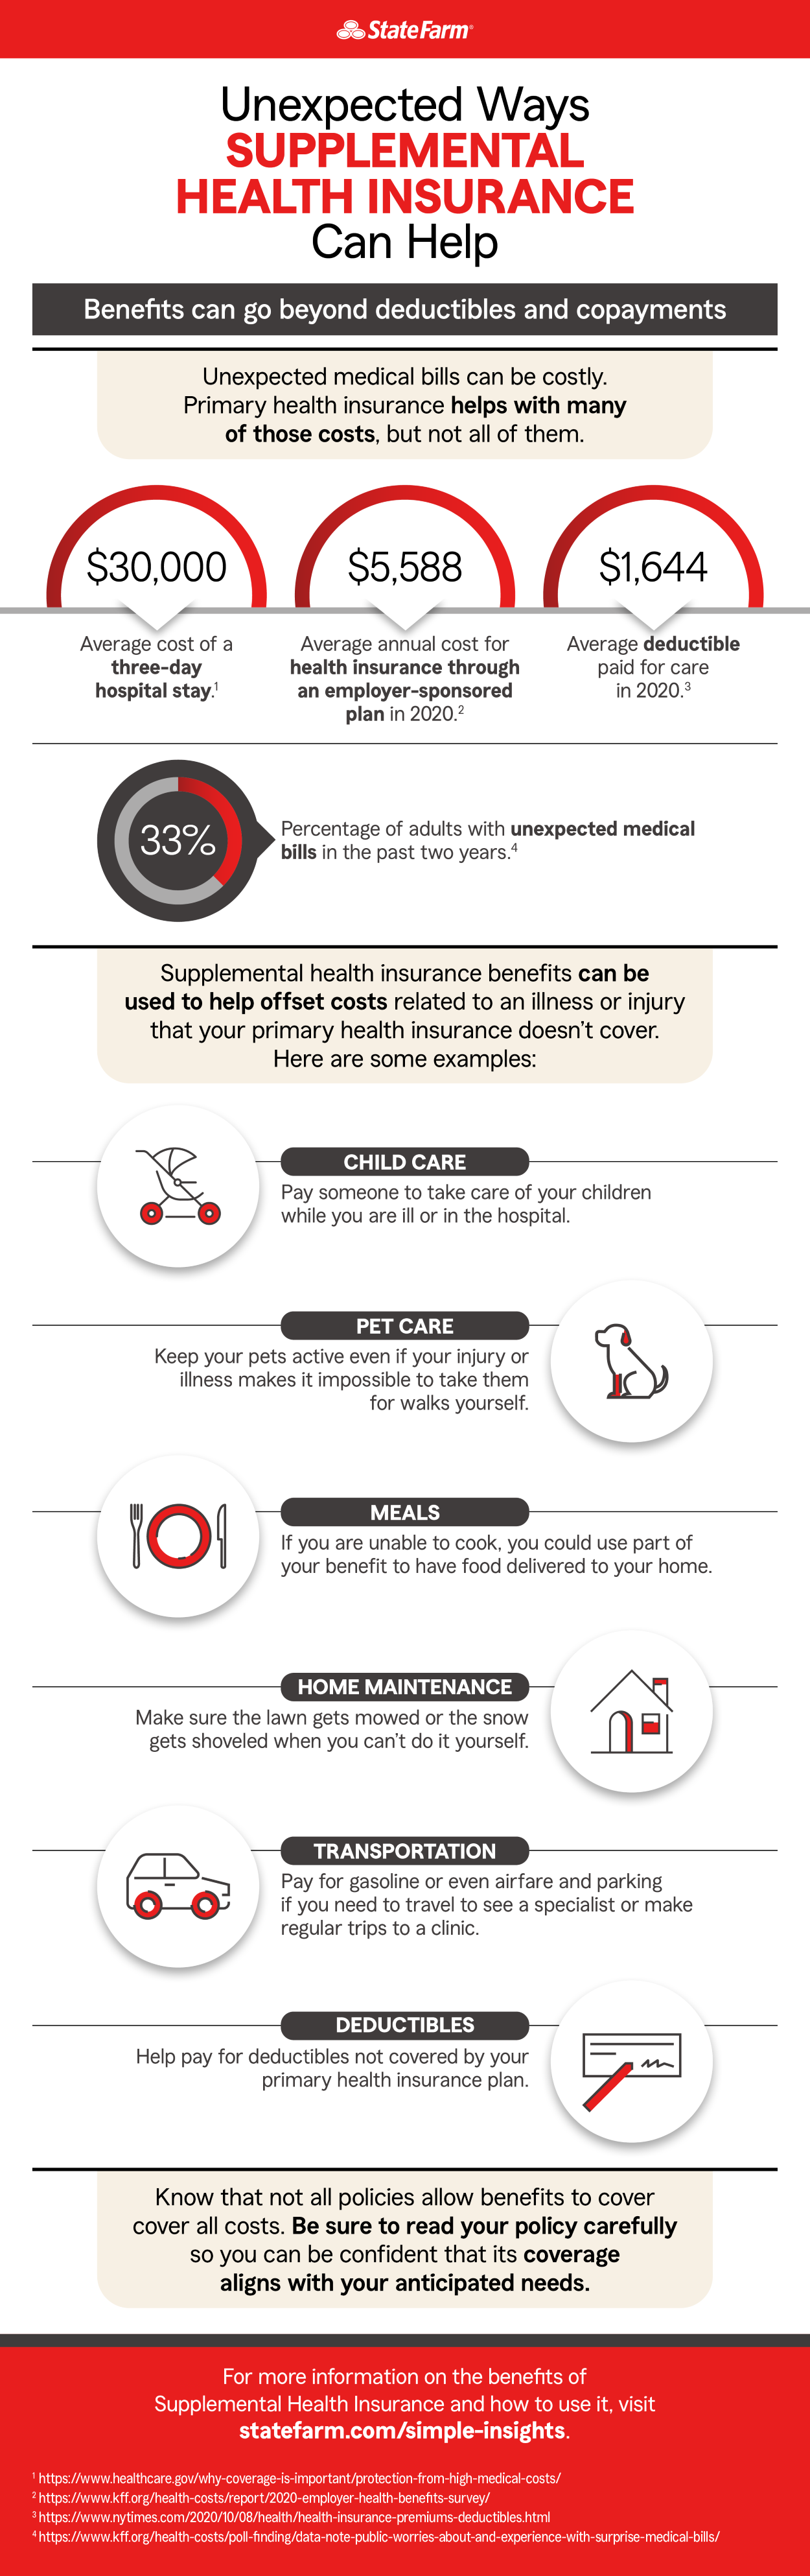 infographic about supplemental health insurance